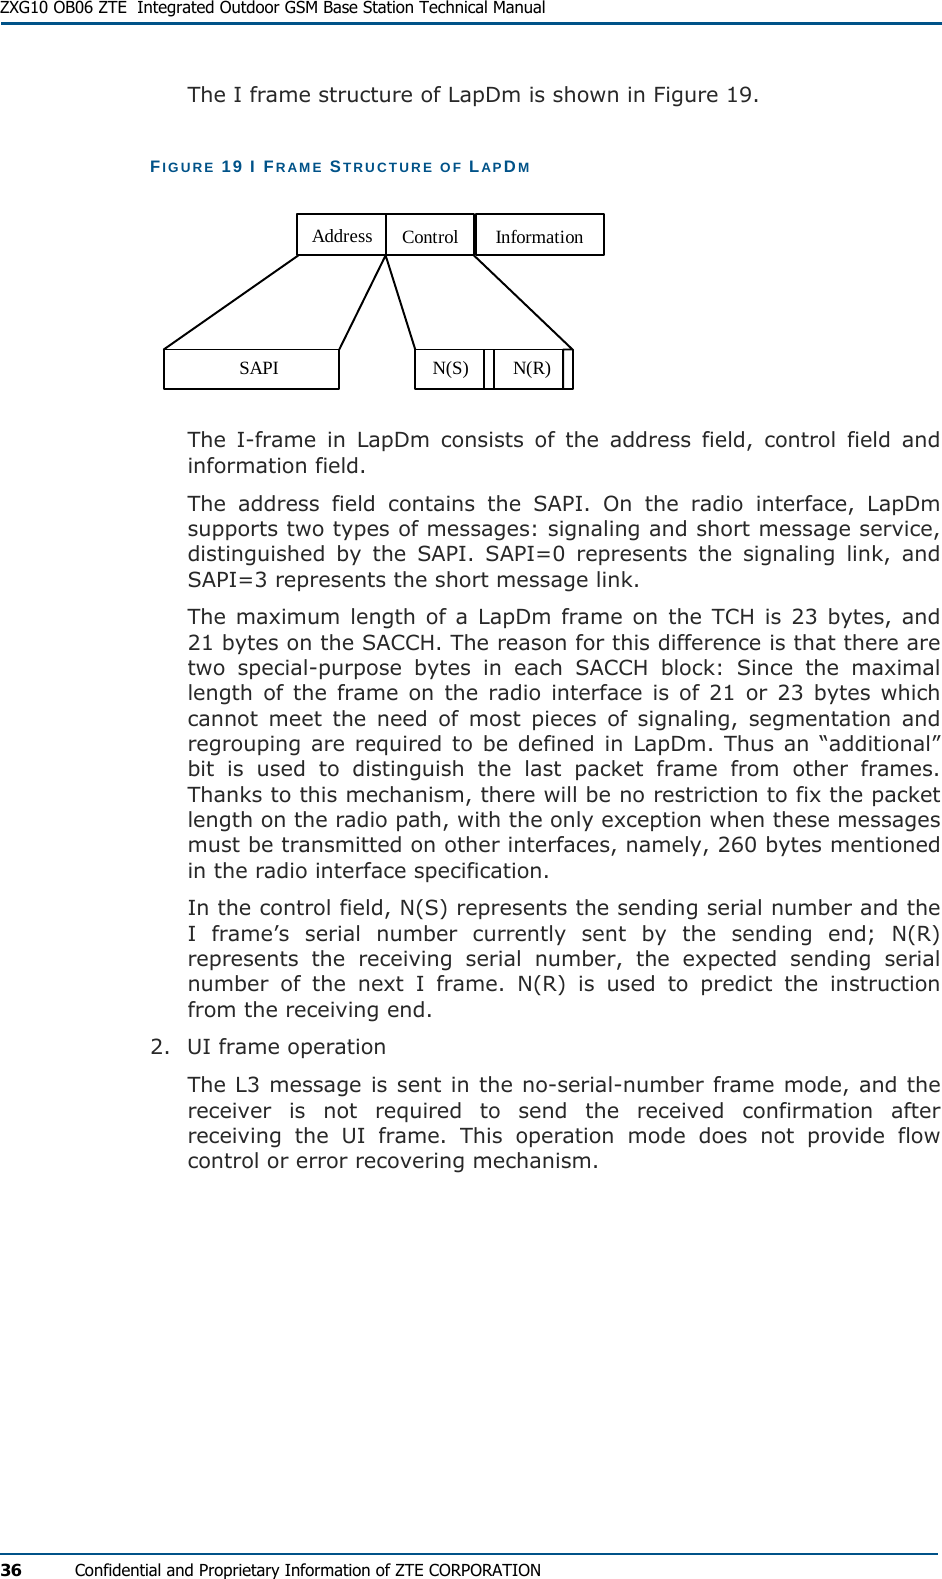  ZXG10 OB06 ZTE  Integrated Outdoor GSM Base Station Technical Manual 36  Confidential and Proprietary Information of ZTE CORPORATION The I frame structure of LapDm is shown in Figure 19. FIGURE 19 I FRAME STRUCTURE OF LAPDM SAPI N(S) N(R)Address Control Information The I-frame in LapDm consists of the address field, control field and information field. The address field contains the SAPI. On the radio interface, LapDm supports two types of messages: signaling and short message service, distinguished by the SAPI. SAPI=0 represents the signaling link, and SAPI=3 represents the short message link. The maximum length of a LapDm frame on the TCH is 23 bytes, and 21 bytes on the SACCH. The reason for this difference is that there are two special-purpose bytes in each SACCH block: Since the maximal length of the frame on the radio interface is of 21 or 23 bytes which cannot meet the need of most pieces of signaling, segmentation and regrouping are required to be defined in LapDm. Thus an “additional” bit is used to distinguish the last packet frame from other frames. Thanks to this mechanism, there will be no restriction to fix the packet length on the radio path, with the only exception when these messages must be transmitted on other interfaces, namely, 260 bytes mentioned in the radio interface specification. In the control field, N(S) represents the sending serial number and the I frame’s serial number currently sent by the sending end; N(R) represents the receiving serial number, the expected sending serial number of the next I frame. N(R) is used to predict the instruction from the receiving end. 2.  UI frame operation The L3 message is sent in the no-serial-number frame mode, and the receiver is not required to send the received confirmation after receiving the UI frame. This operation mode does not provide flow control or error recovering mechanism. 